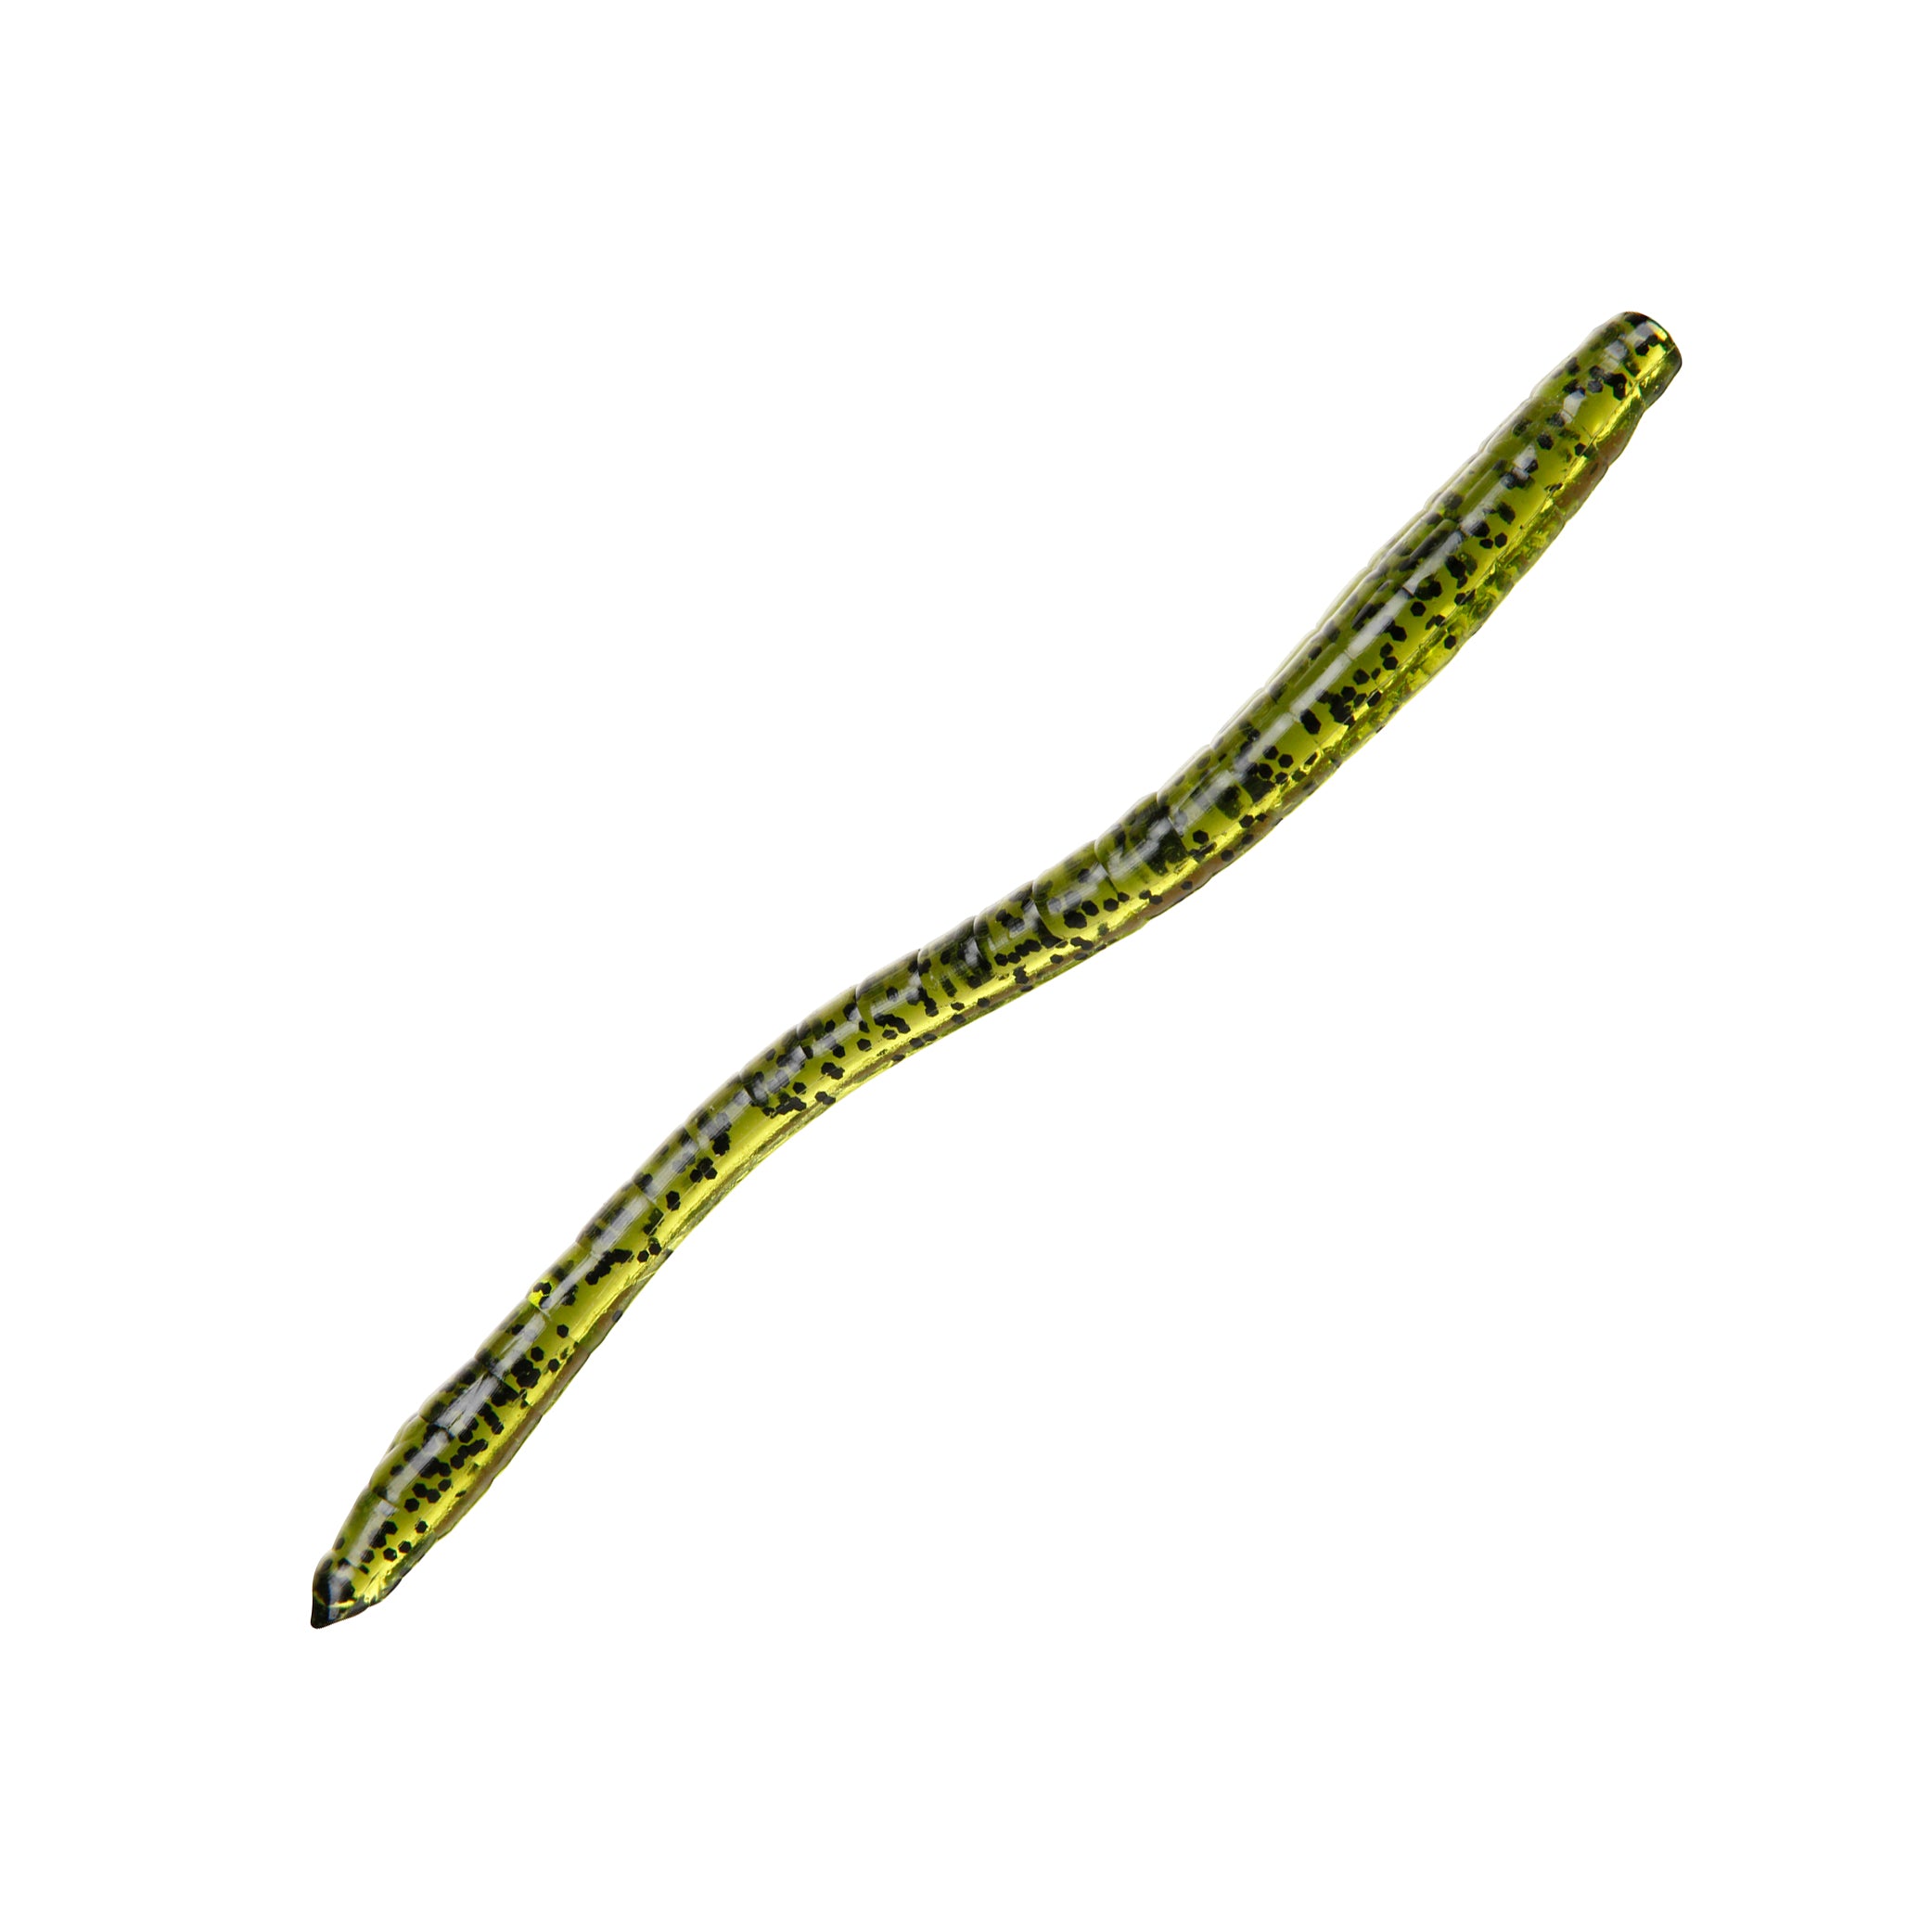 finesse fishing worm in watermelon seed color